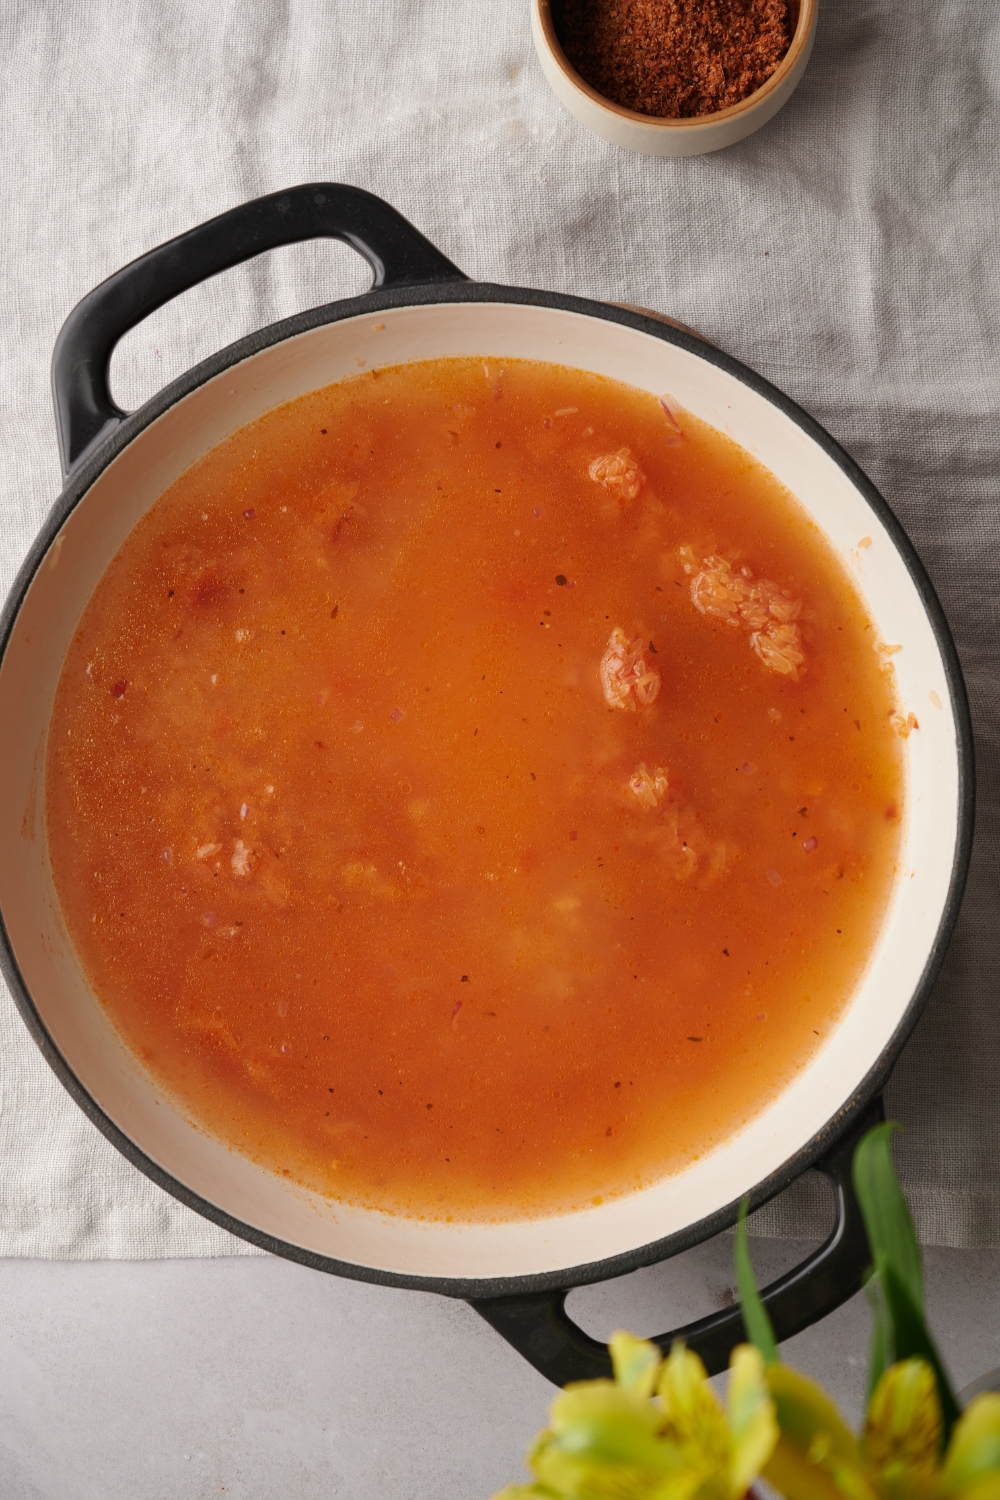 Chicken stock, tomato sauce, and rice are all together in a white pot.